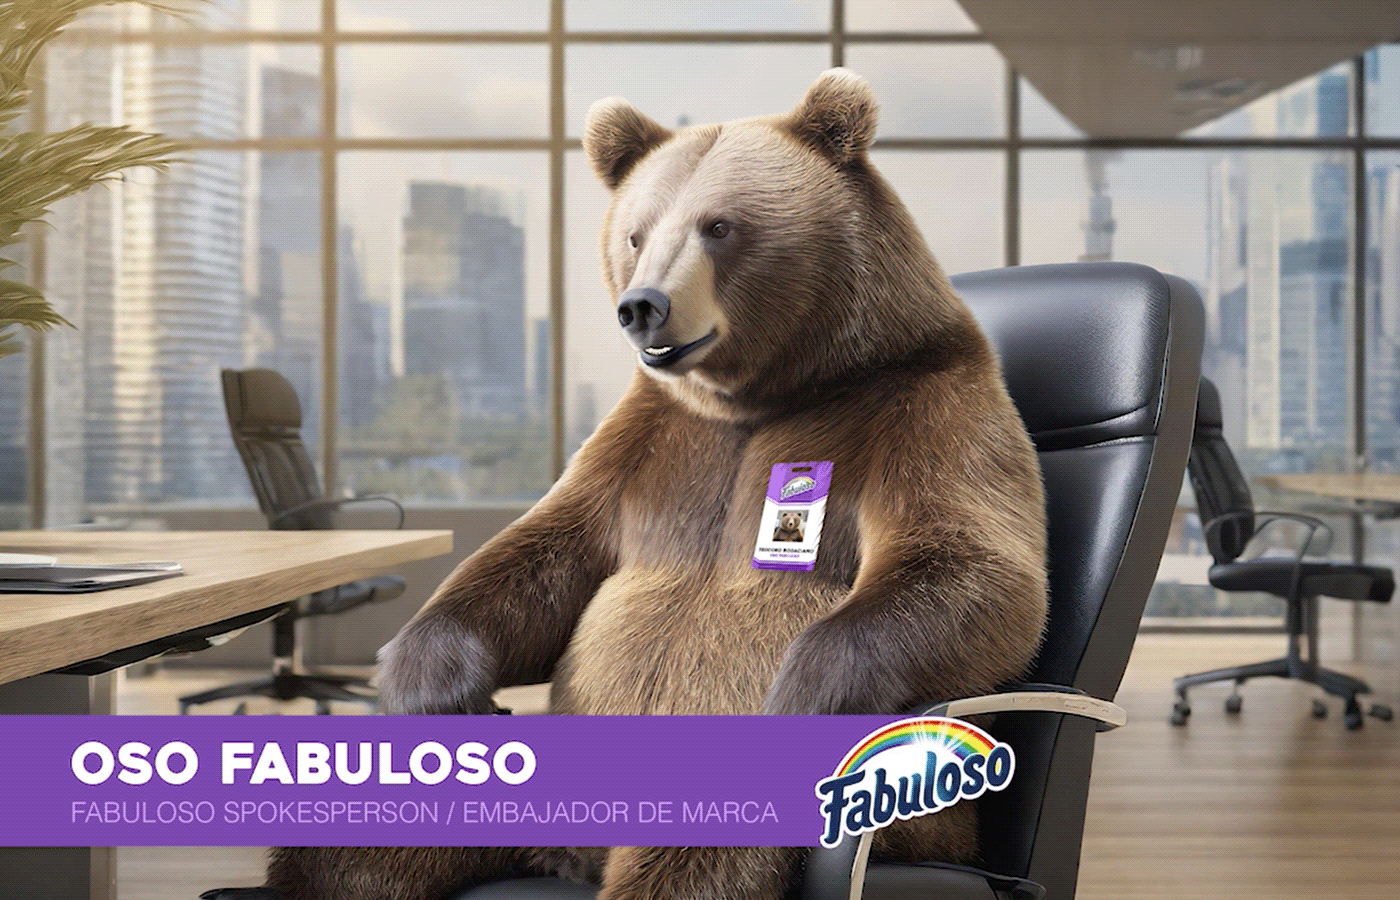 Fabuloso oso bear Advertising  anúncio detergent laundry clean